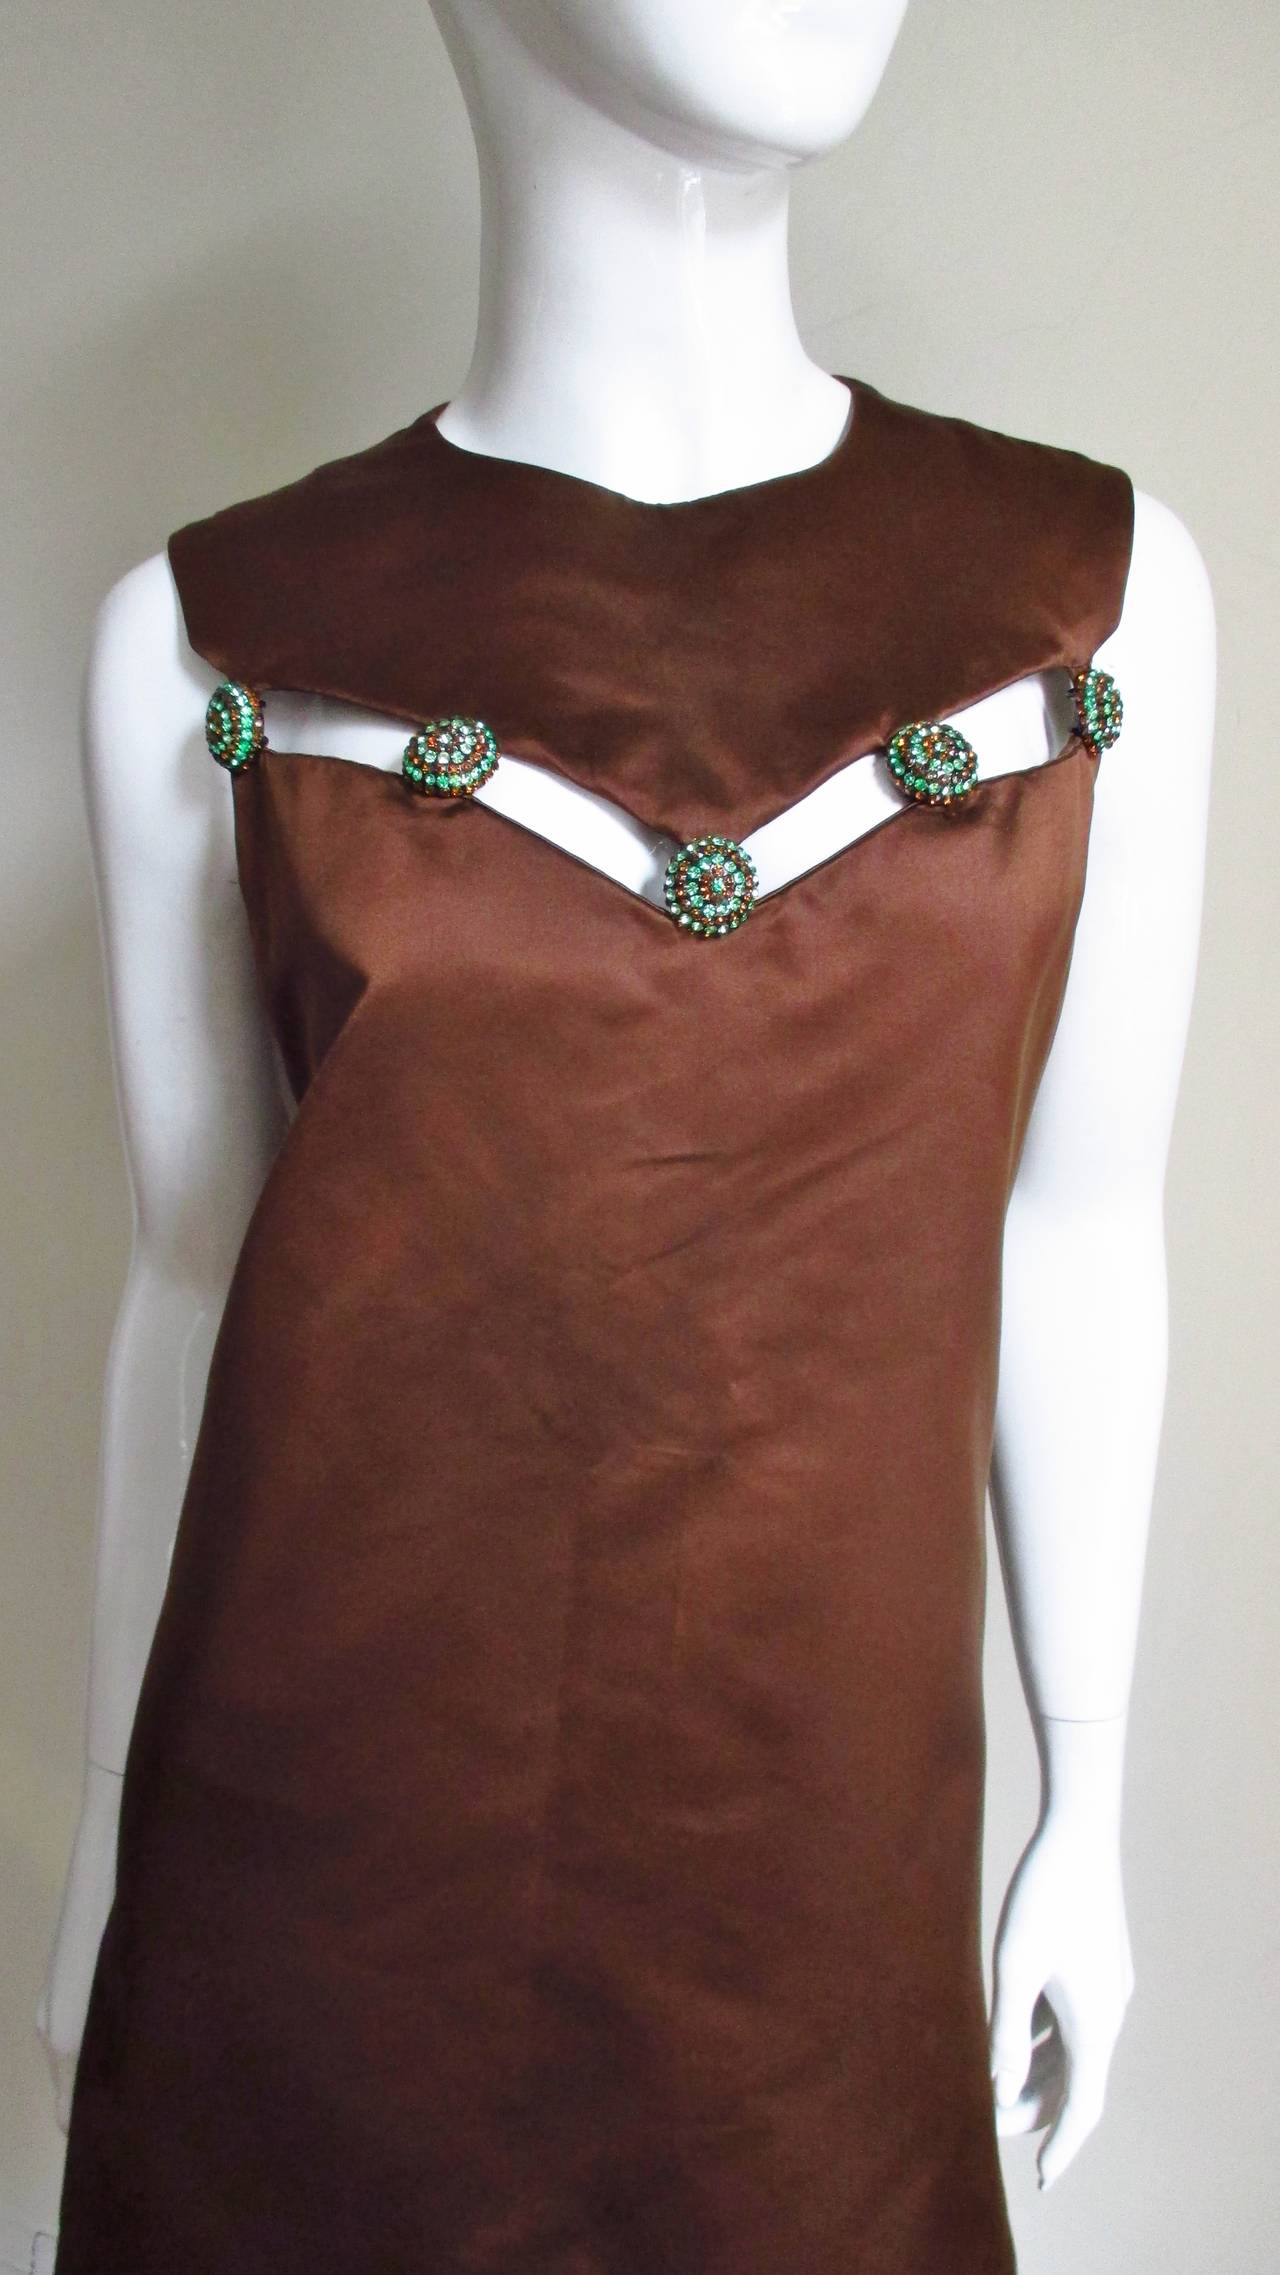 A fabulous silk dress in a rich chocolate brown from Christian Dior. It has a dramatic sweetheart shaped yoke attached to dress with 5 gorgeous green and brown rhinestone buttons which allow a 1